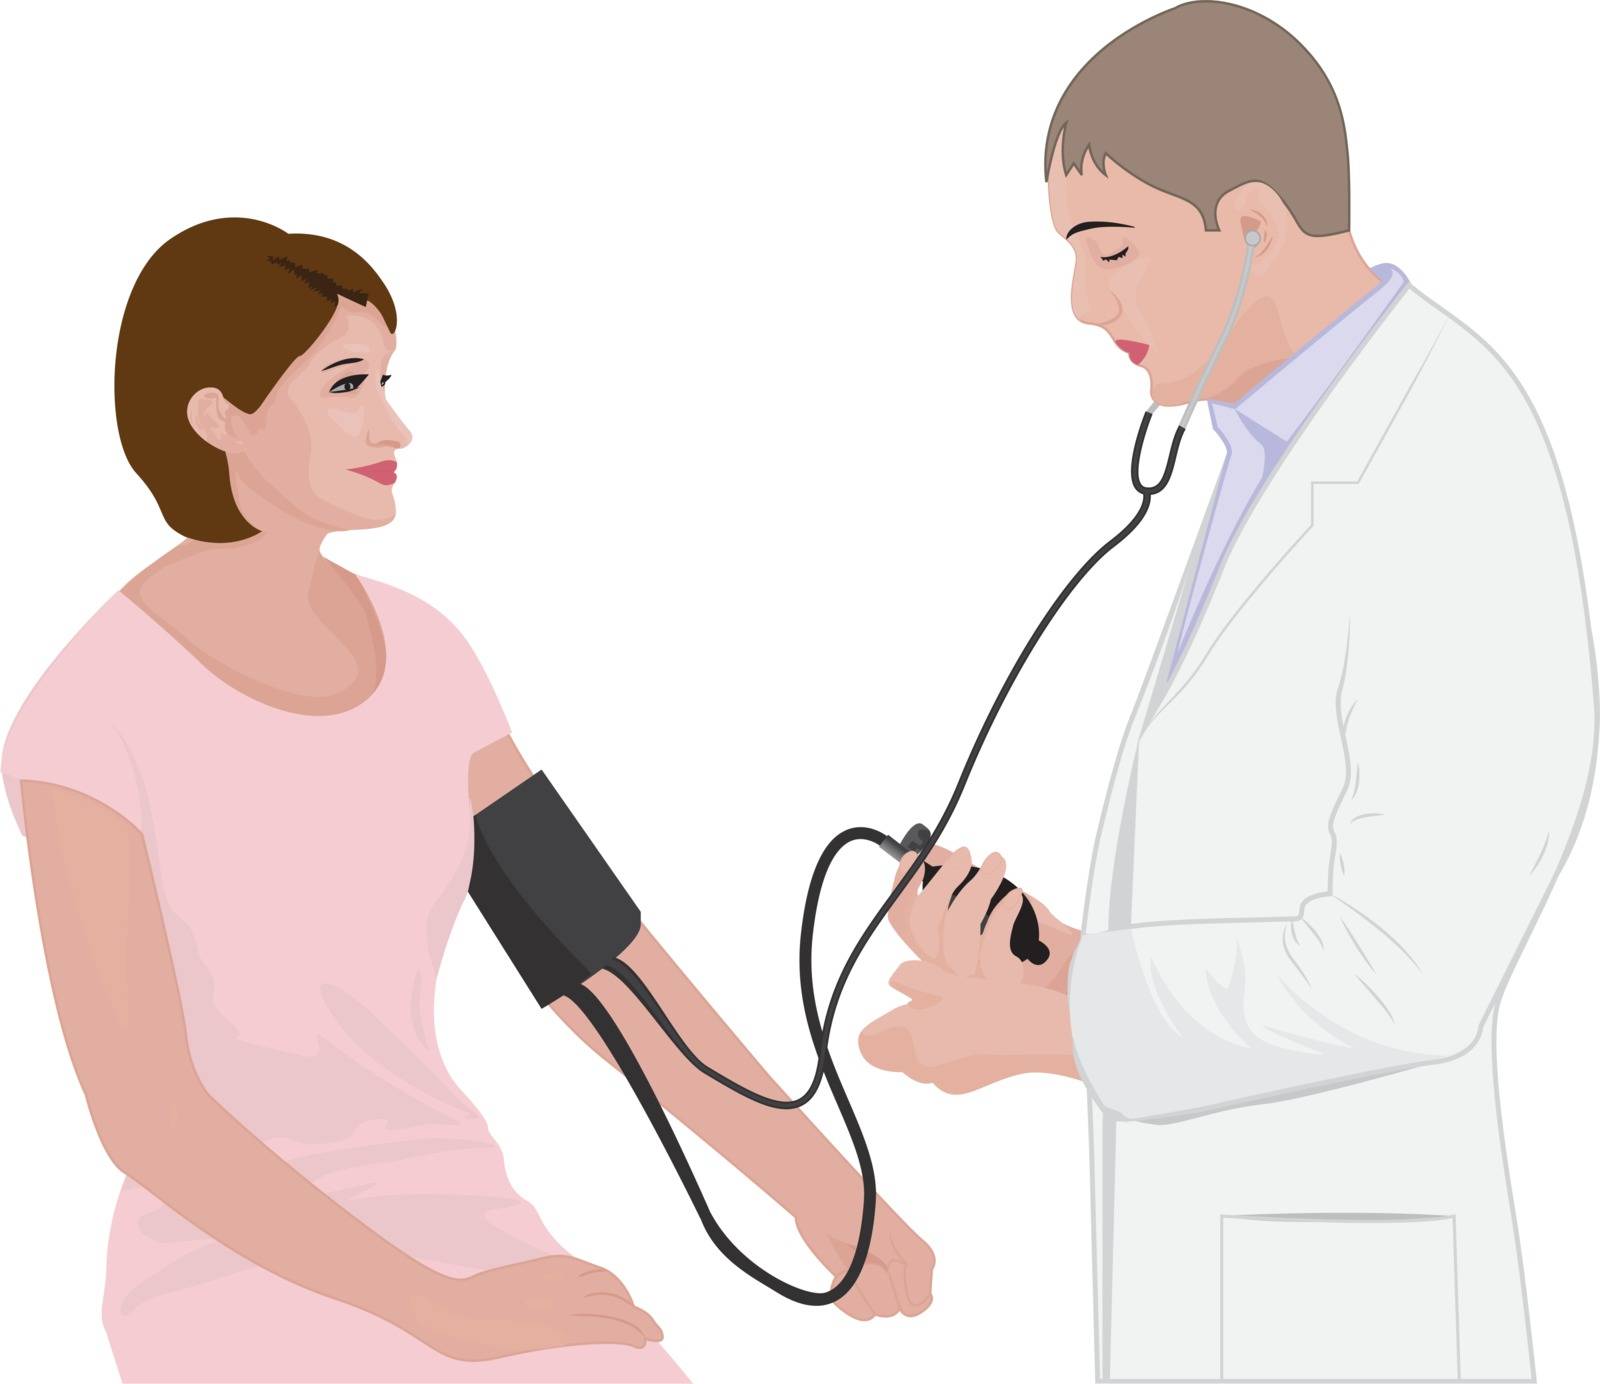 Blood pressure measuring  cardio exam  visit to a doctor vector illustration on a white background